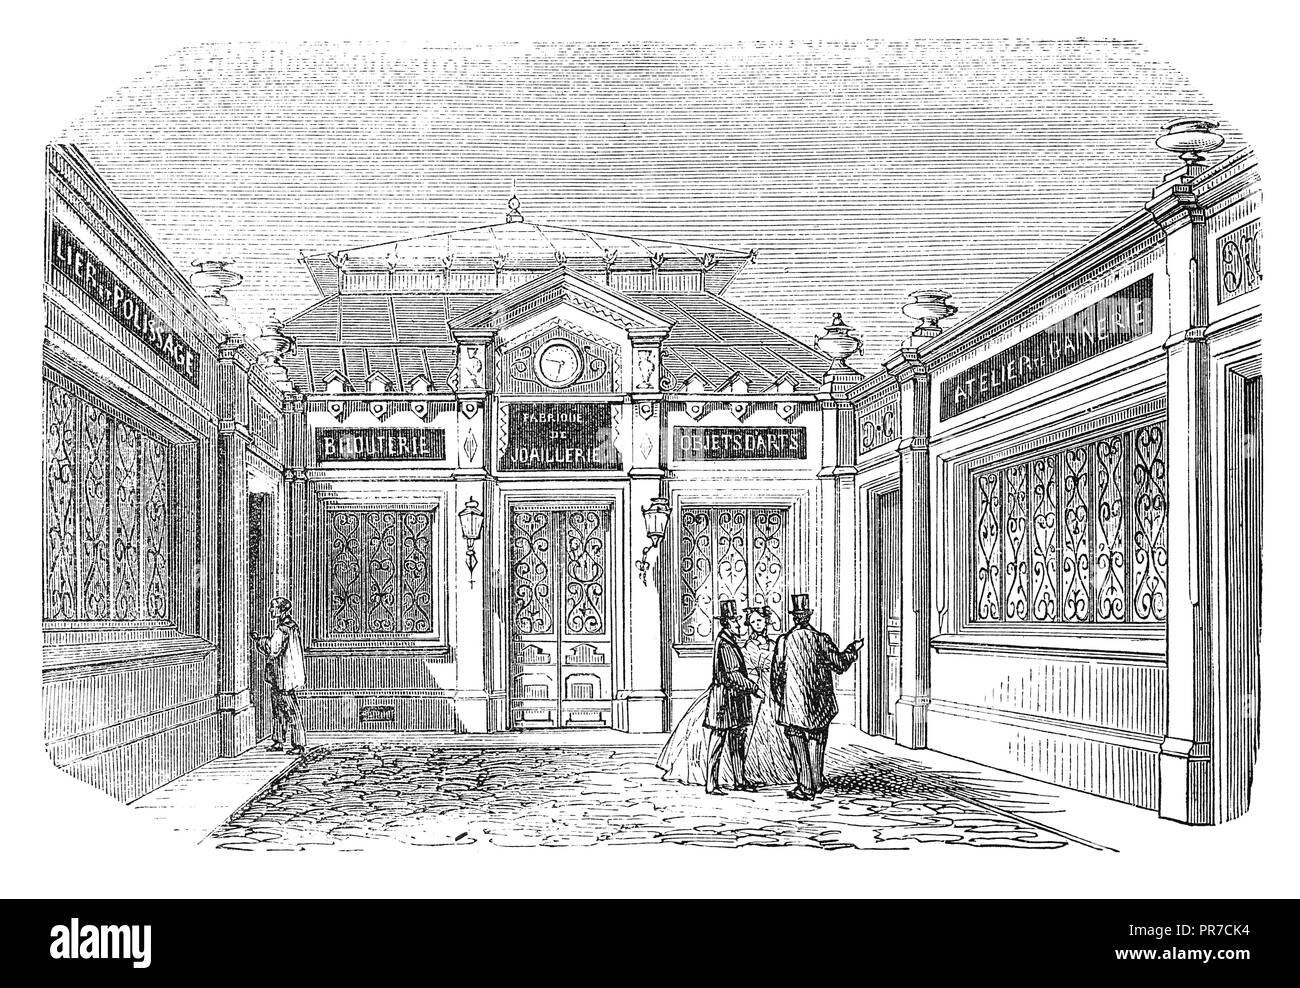 19th century illustration of the entrance to Leon Rouvenat's jewellery factory in Paris, France (c. 19th century). Published in 'The Practical Magazin Stock Photo